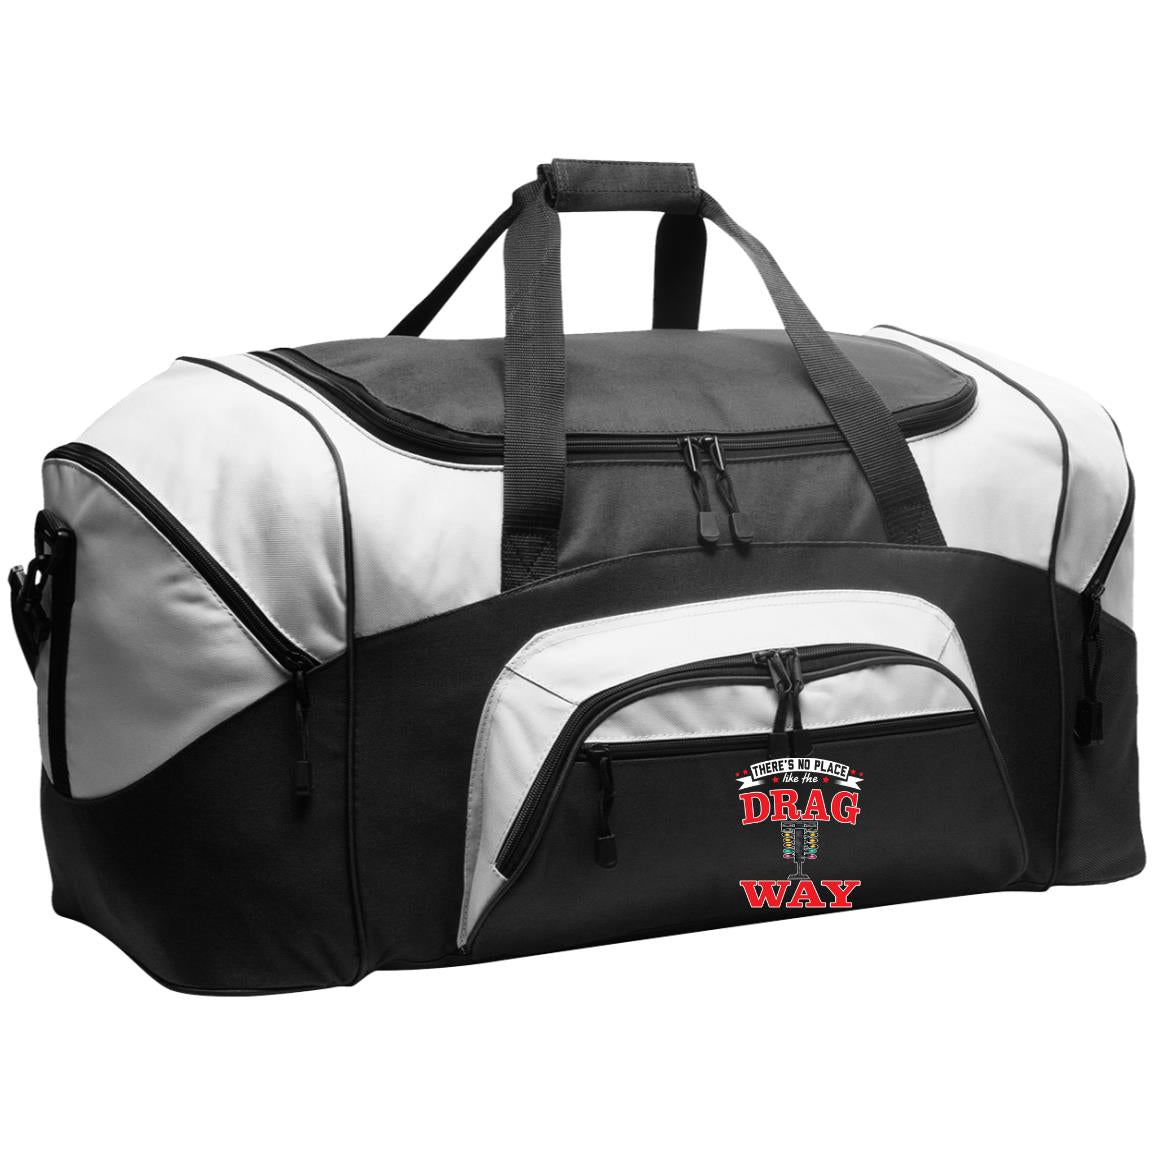 There's No Place Like The Dragway Colorblock Sport Duffel Bag